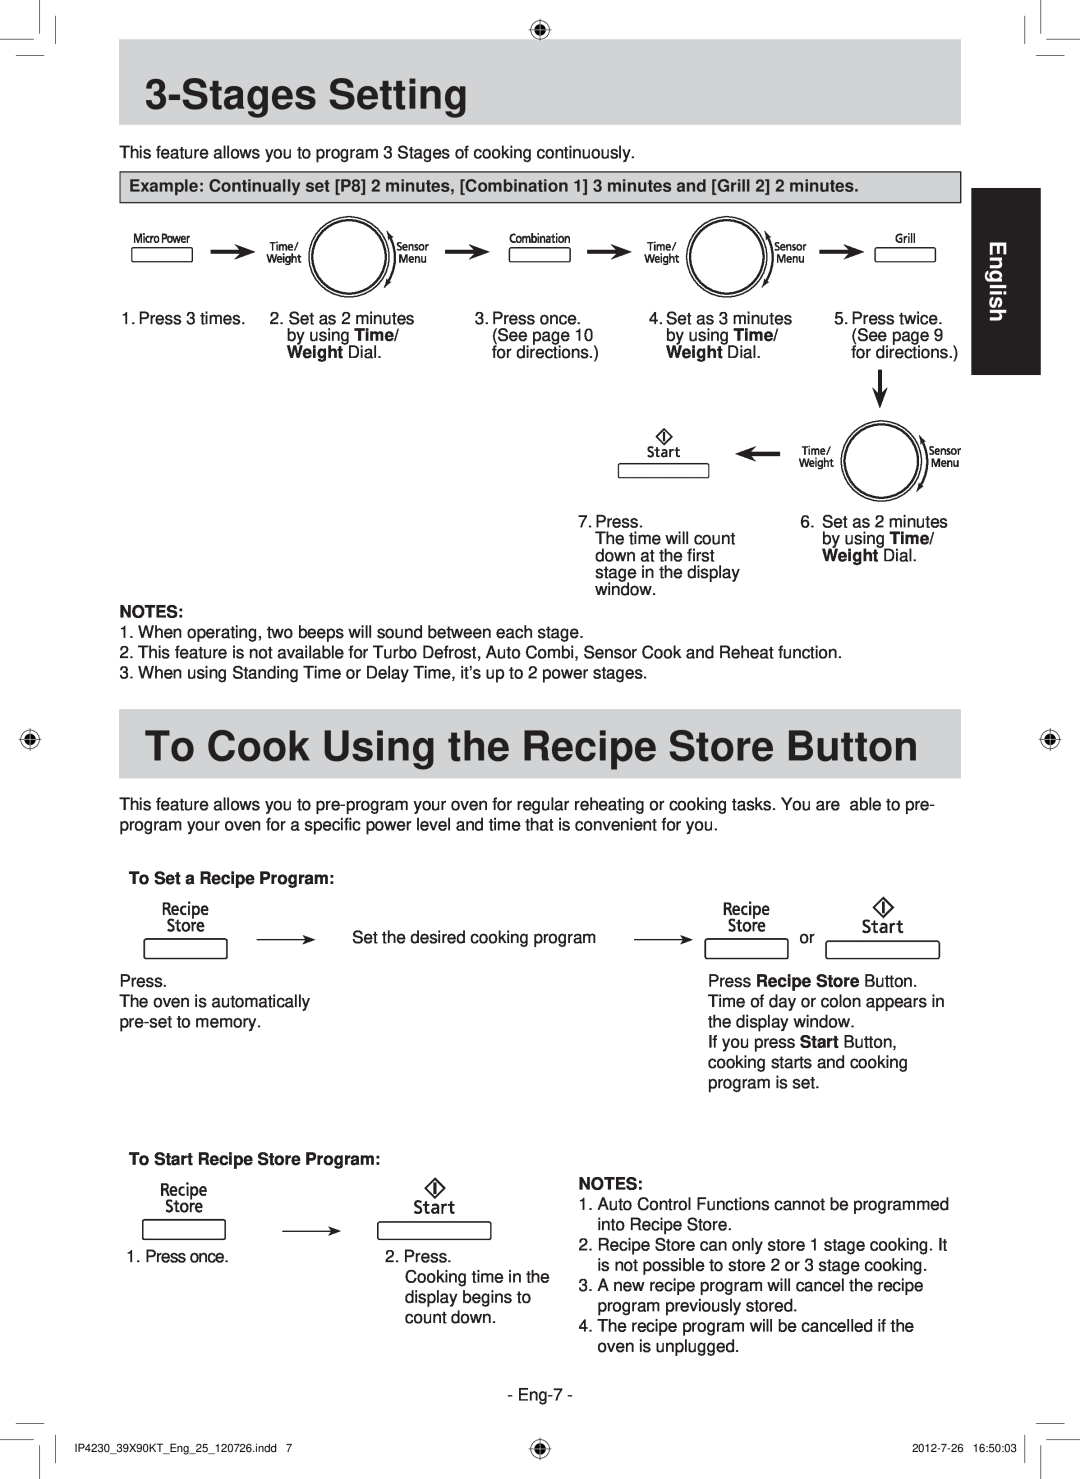 Panasonic F00039X90KT StagesSetting, To Cook Using the Recipe Store Button, English, Weight Dial, To Set a Recipe Program 